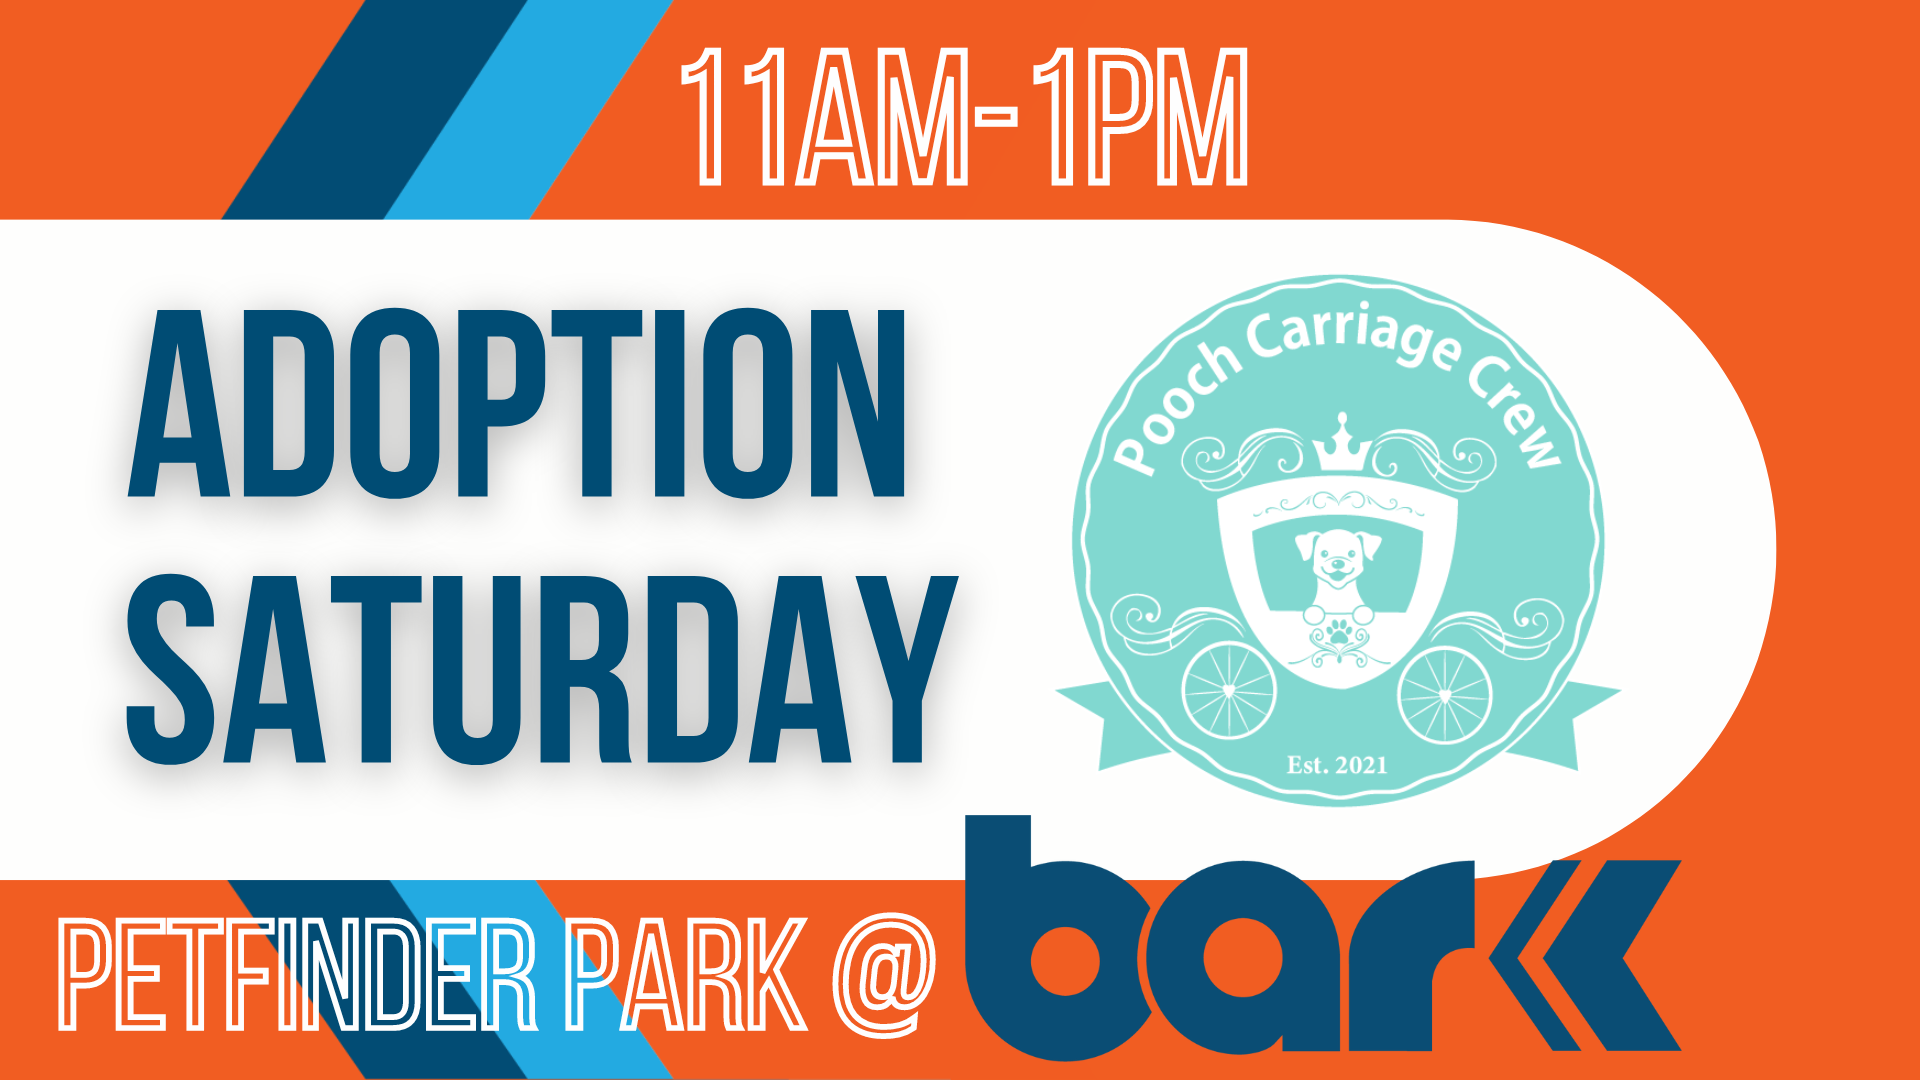 Pooch Carriage Crew presents adoption saturday from 11 am to 1pm at perfinder park at Bar K